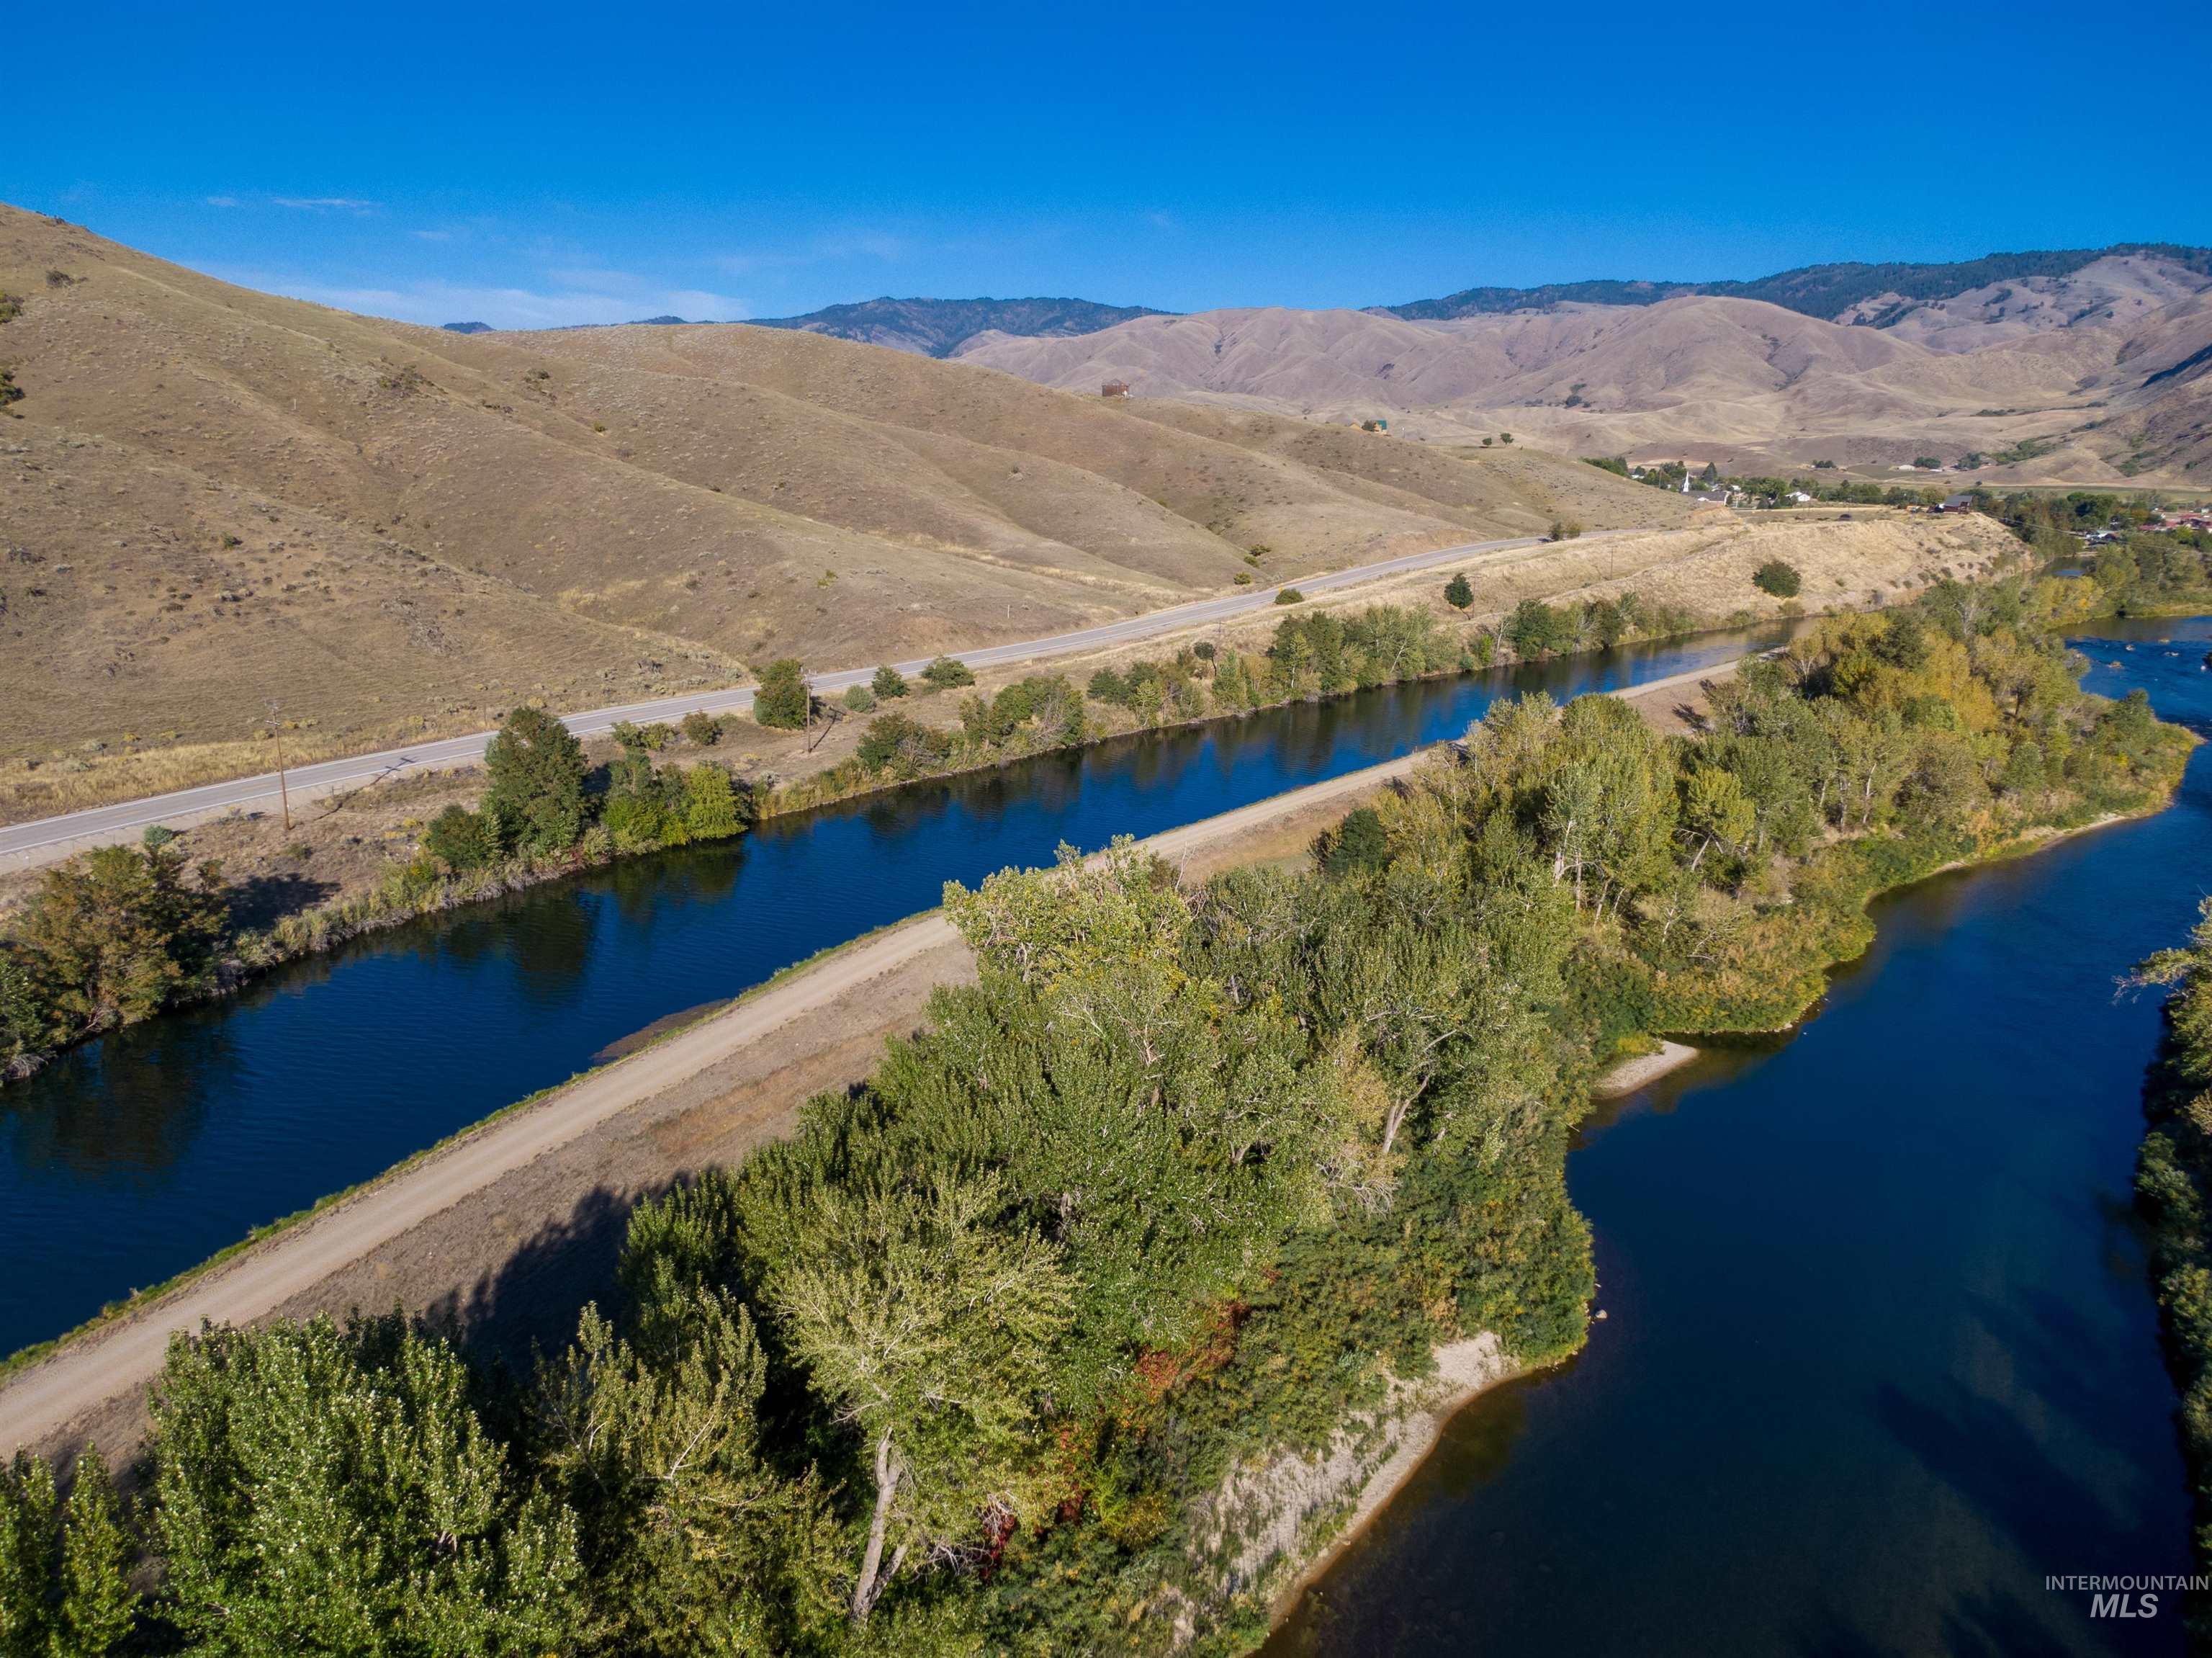 TBD Hwy 52 Parcel A&B, Horseshoe Bend, Idaho 83629, Land For Sale, Price $500,000,MLS 98891426